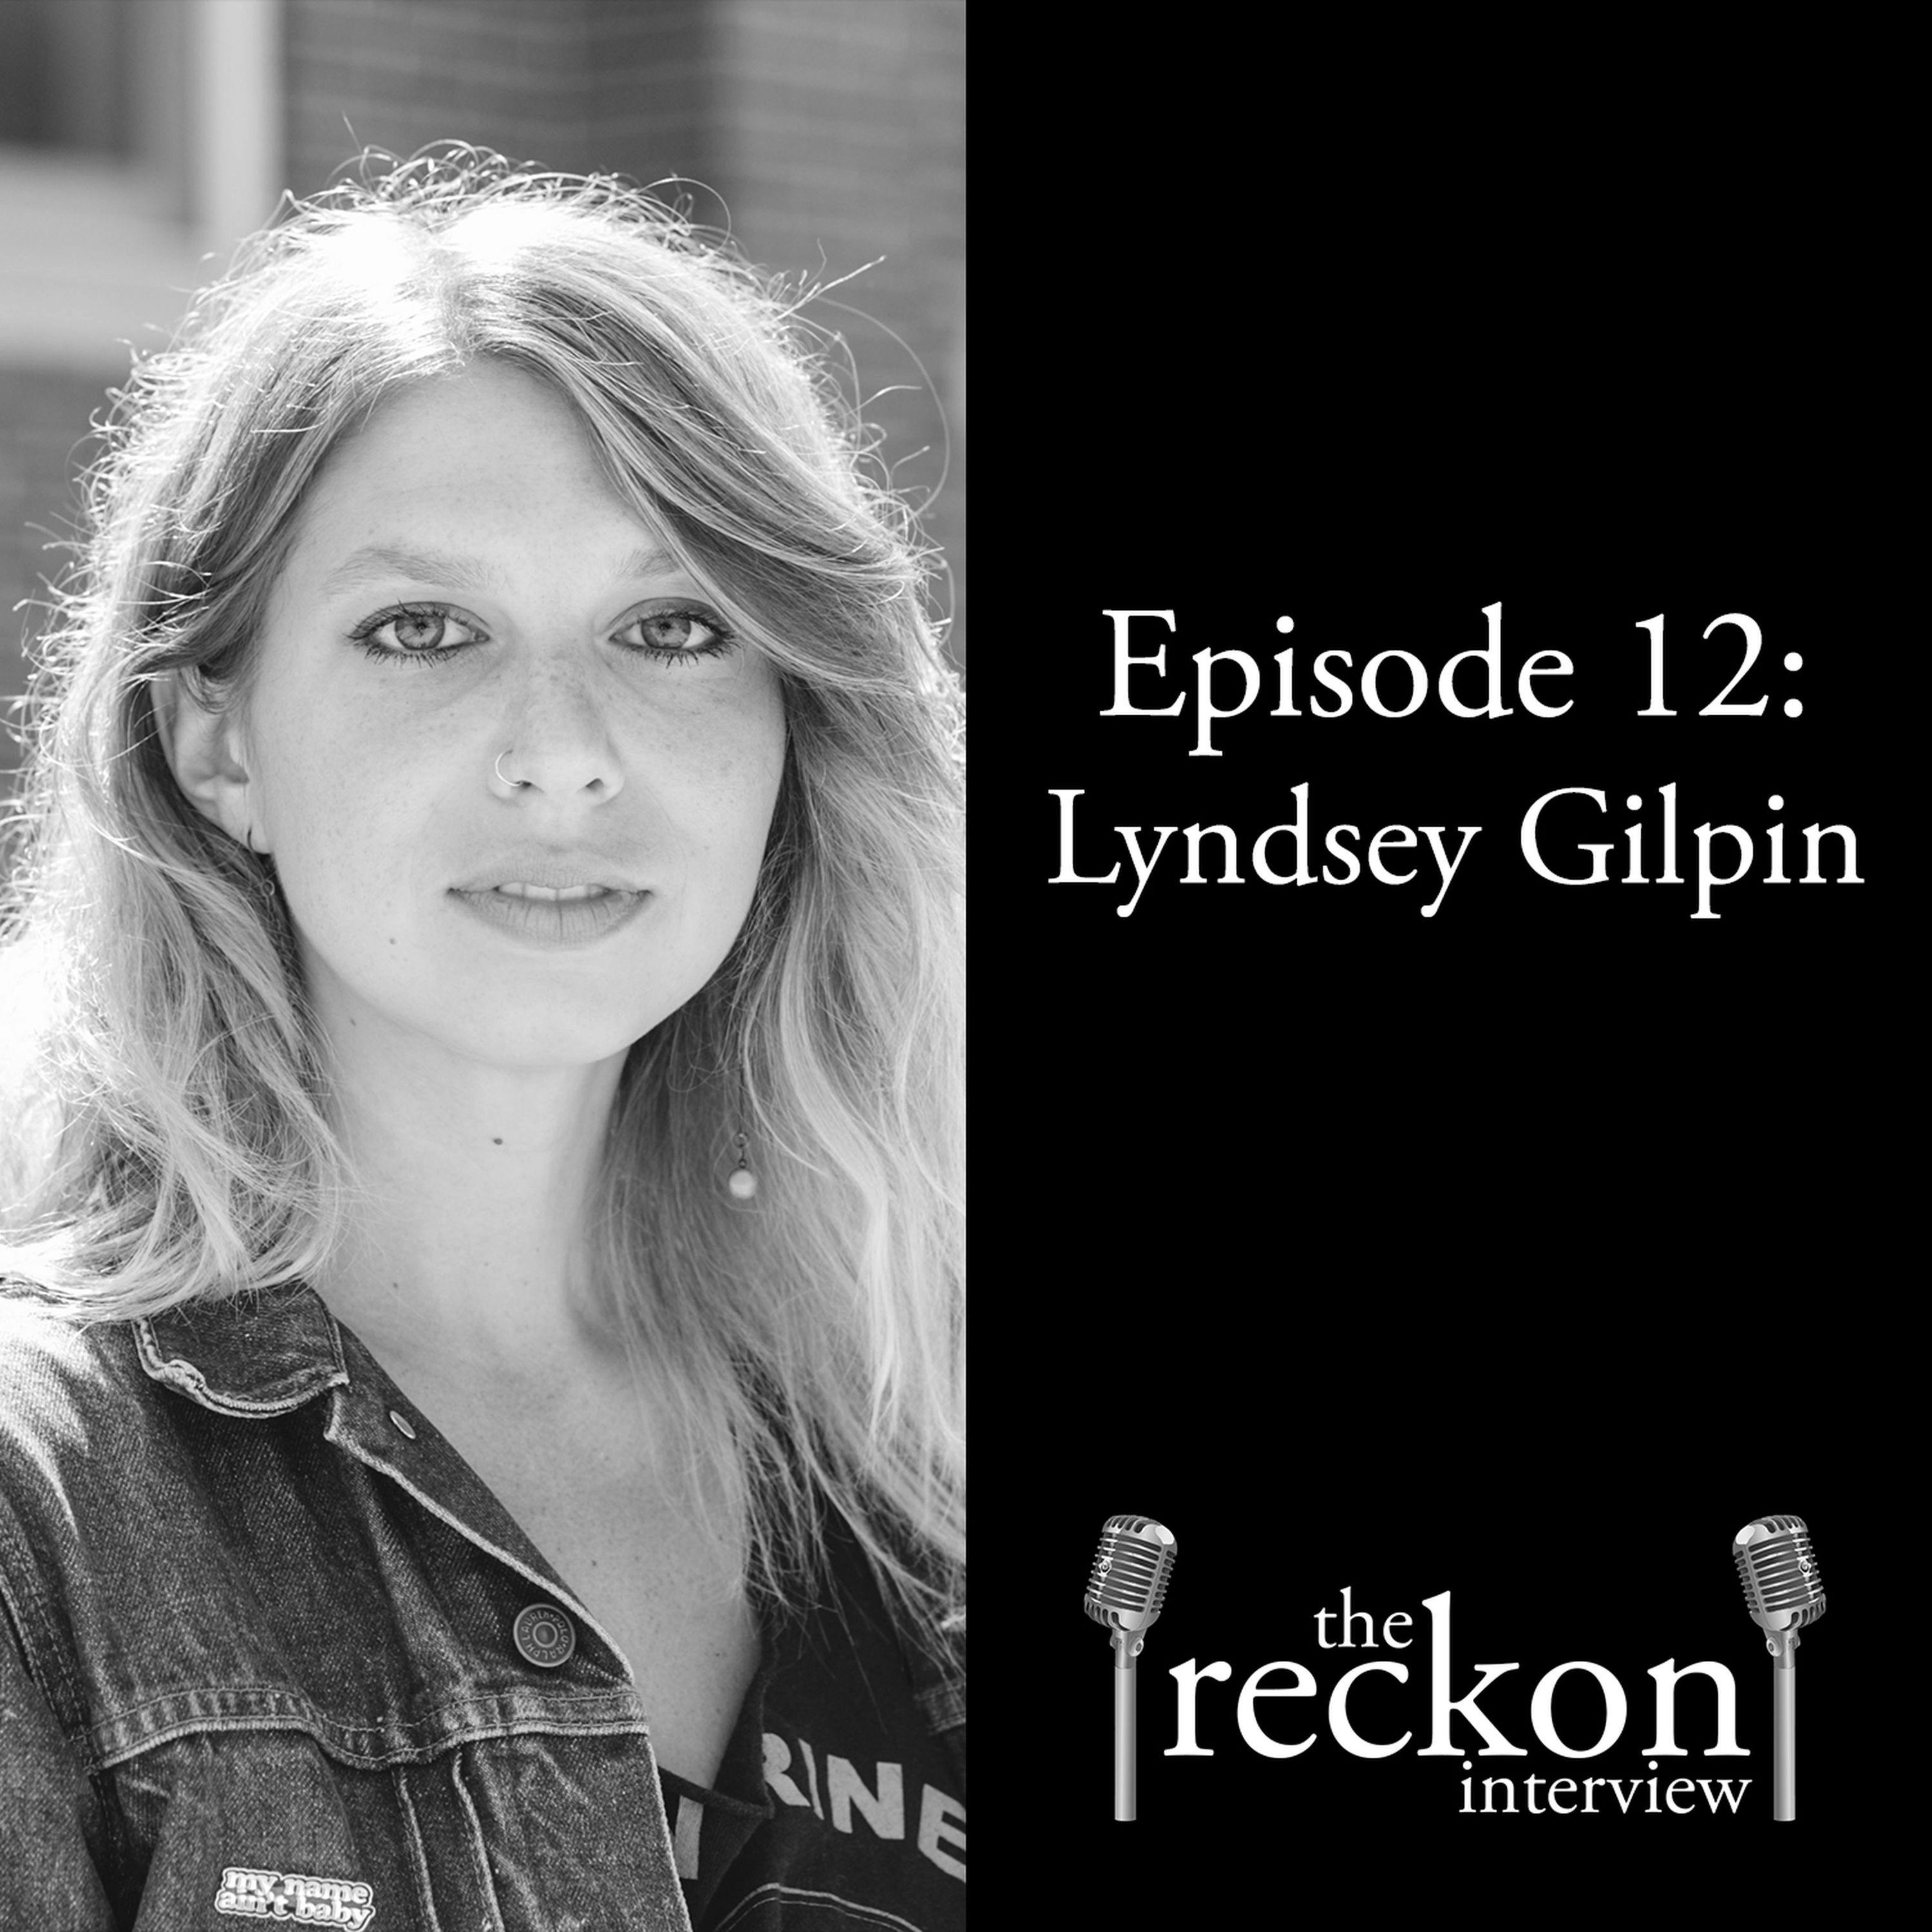 Lyndsey Gilpin on the South's changing climate and media